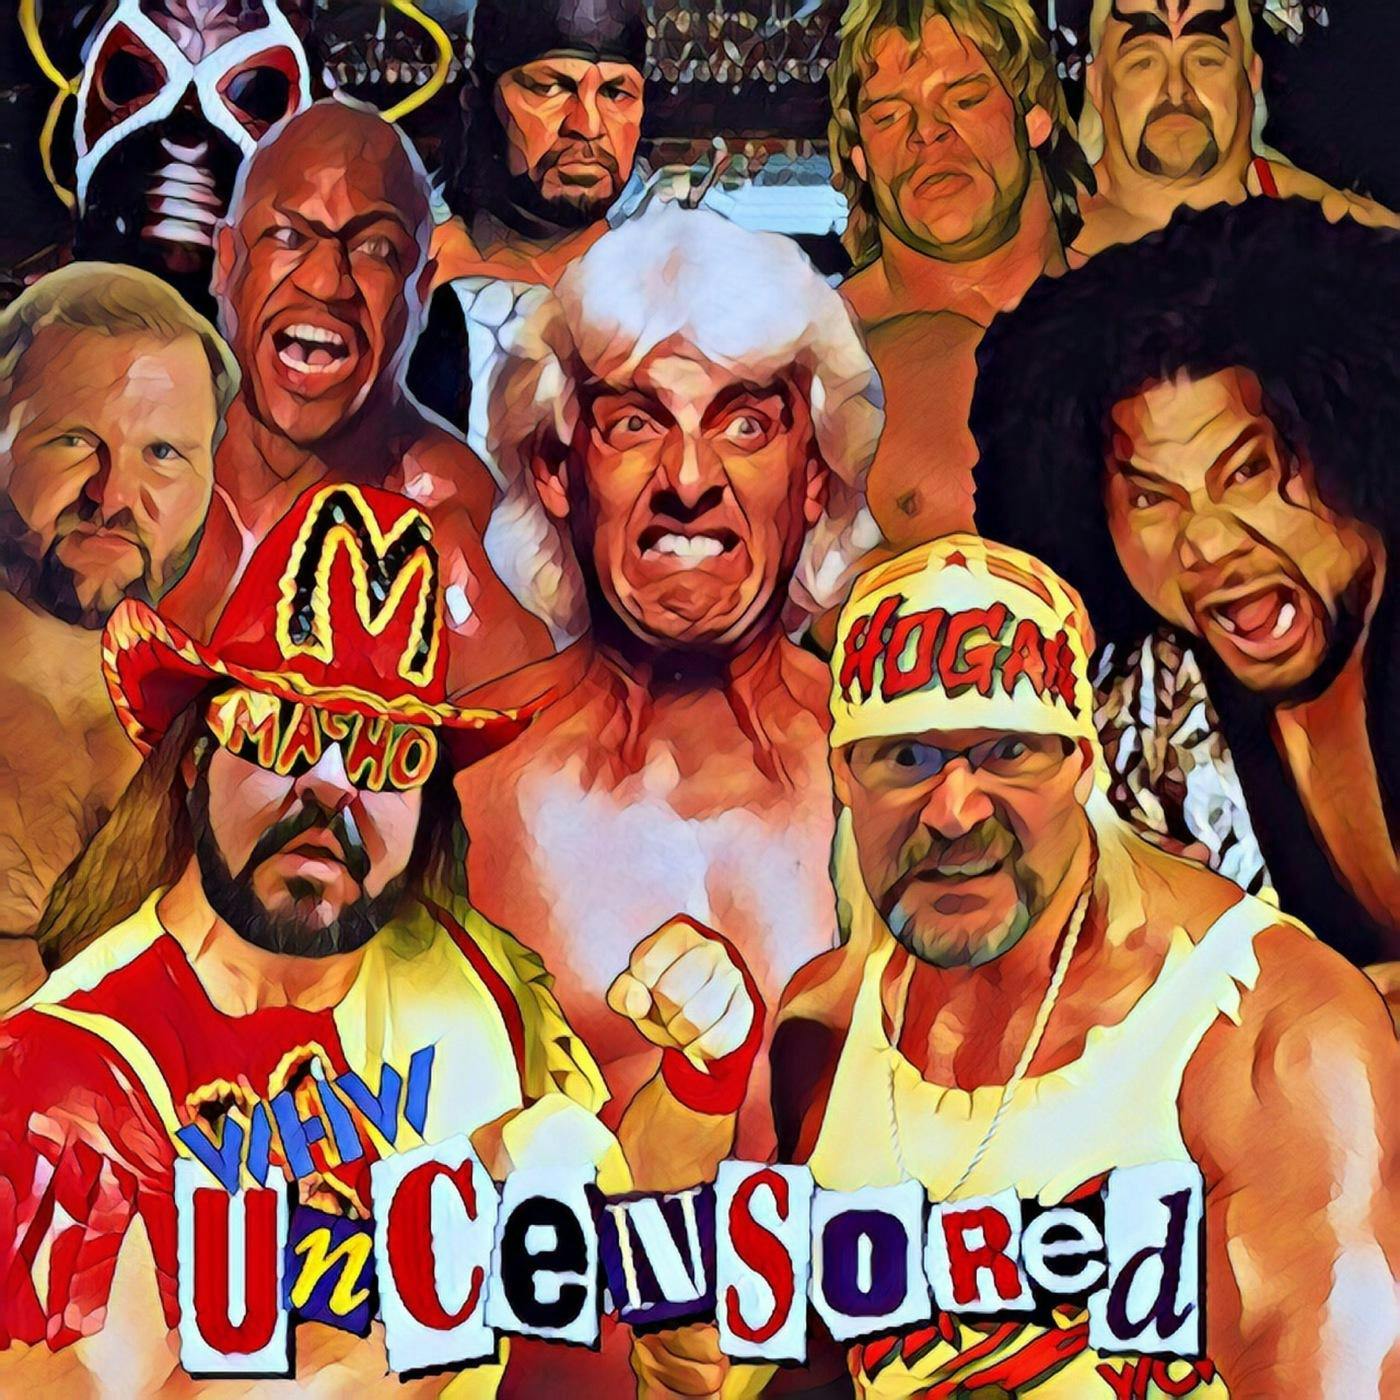 61: Episode 61: Uncensored 96, The Alliance to End Hulkamania